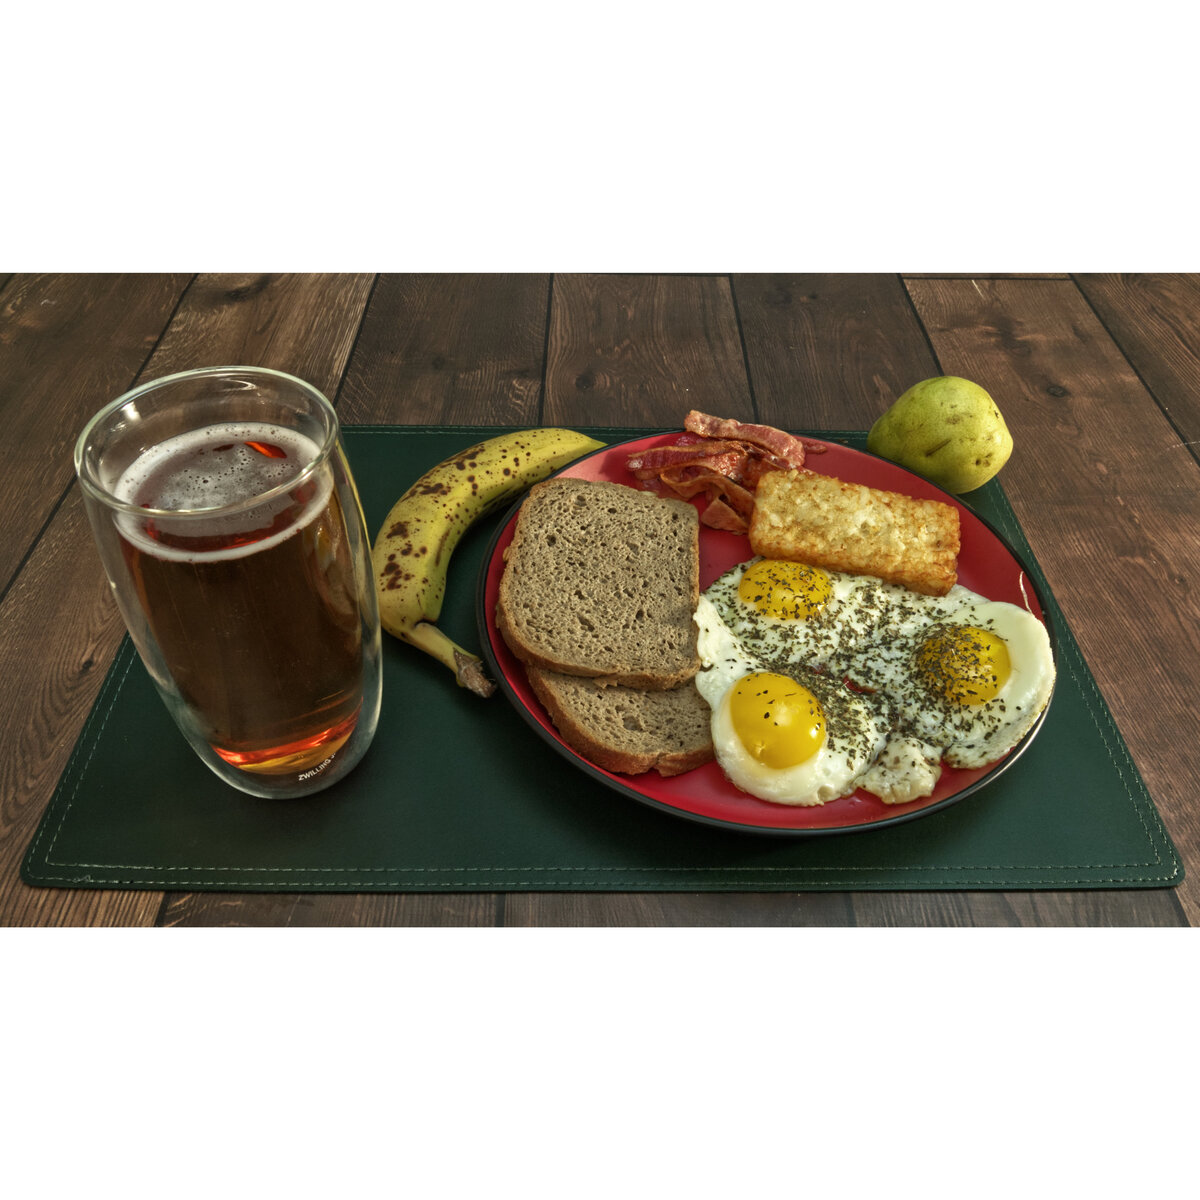 Eggs, Bacon, Hash Brown Patty, Pumpernickel Bread, Banana, Pear and Sparkling Blush Cider